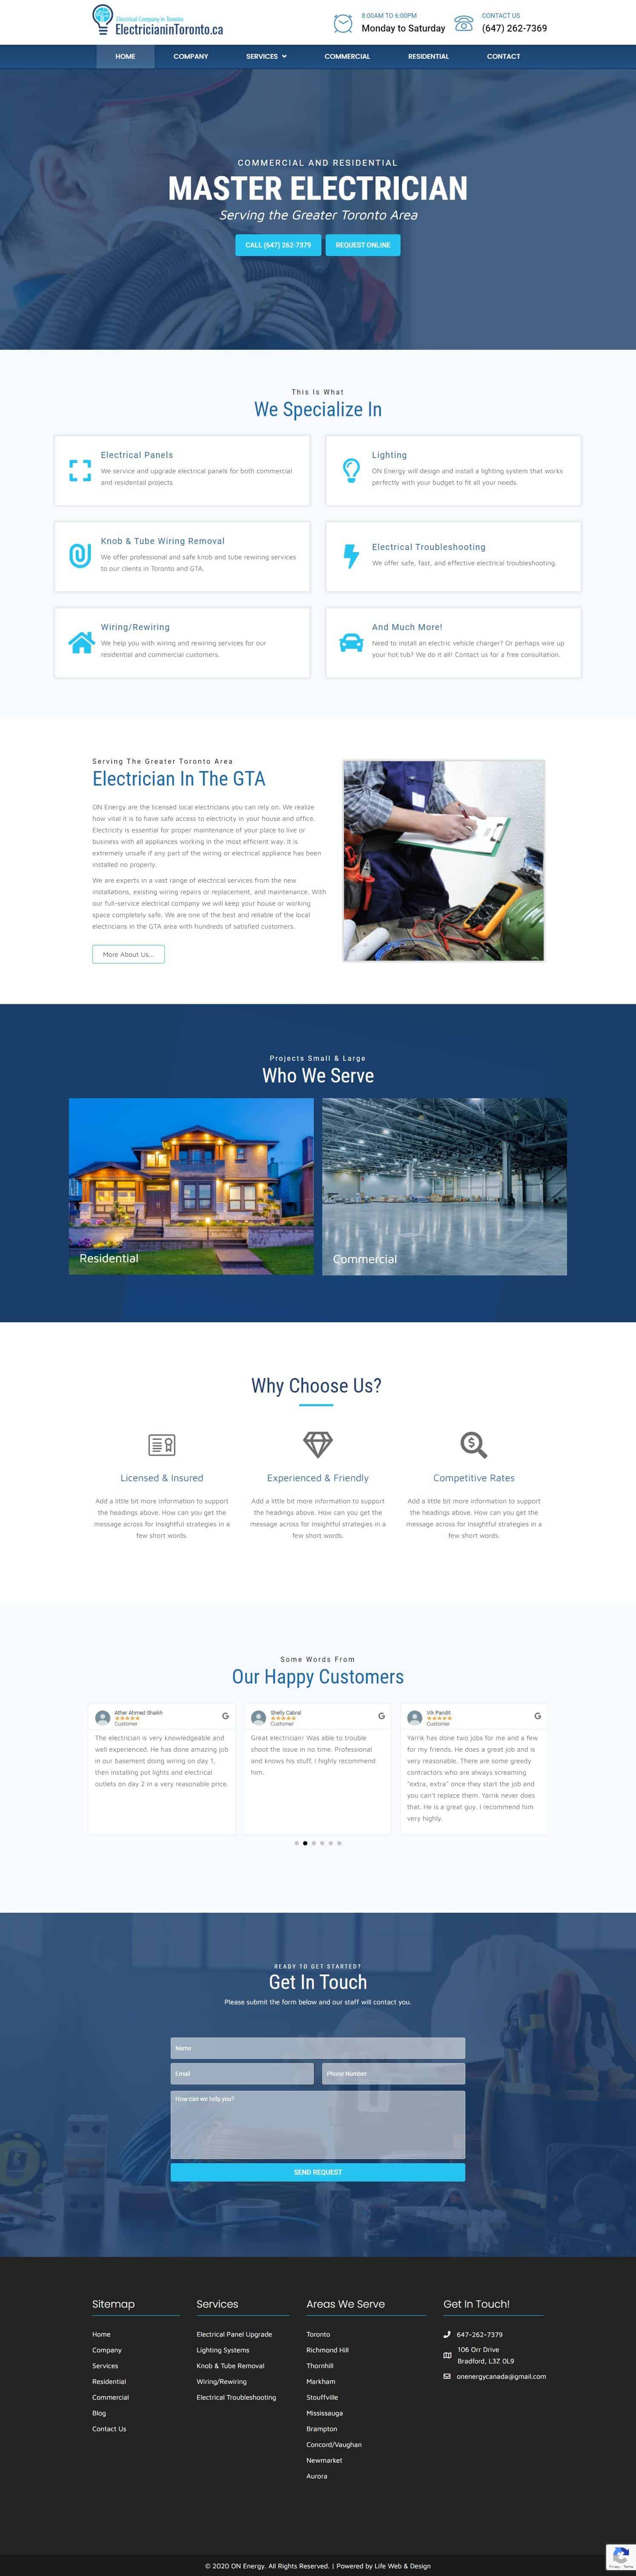 web design project for Electrician serving Toronto Ontario